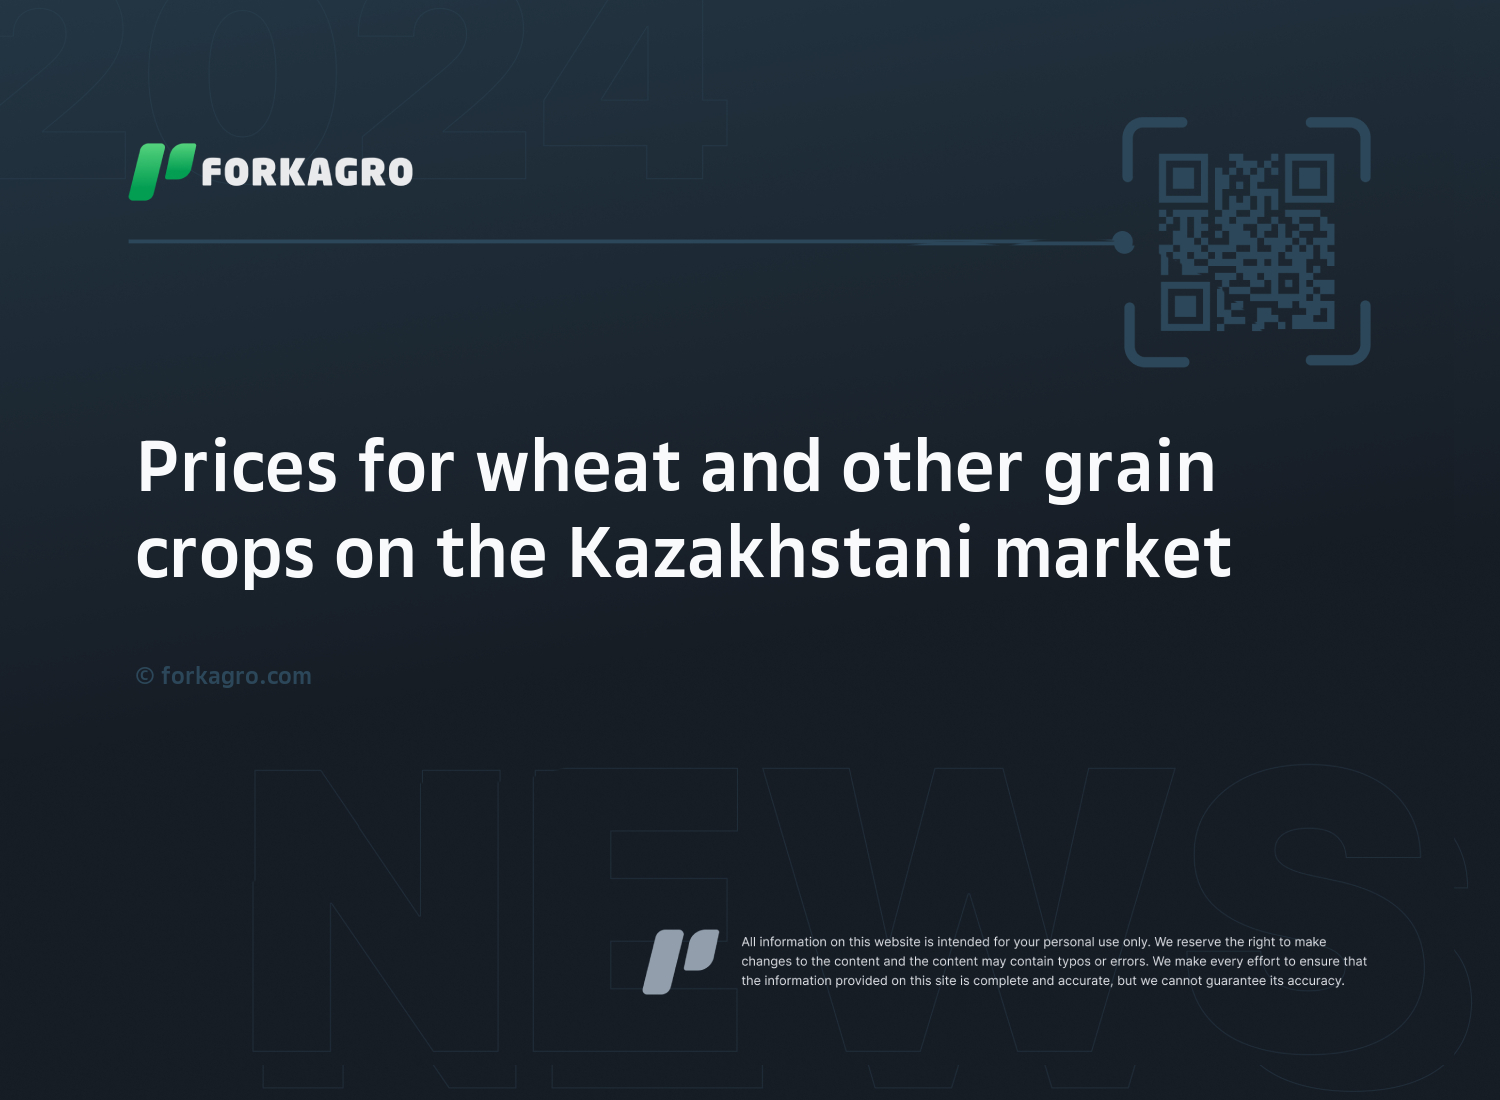 Prices for wheat and other grain crops on the Kazakhstani market